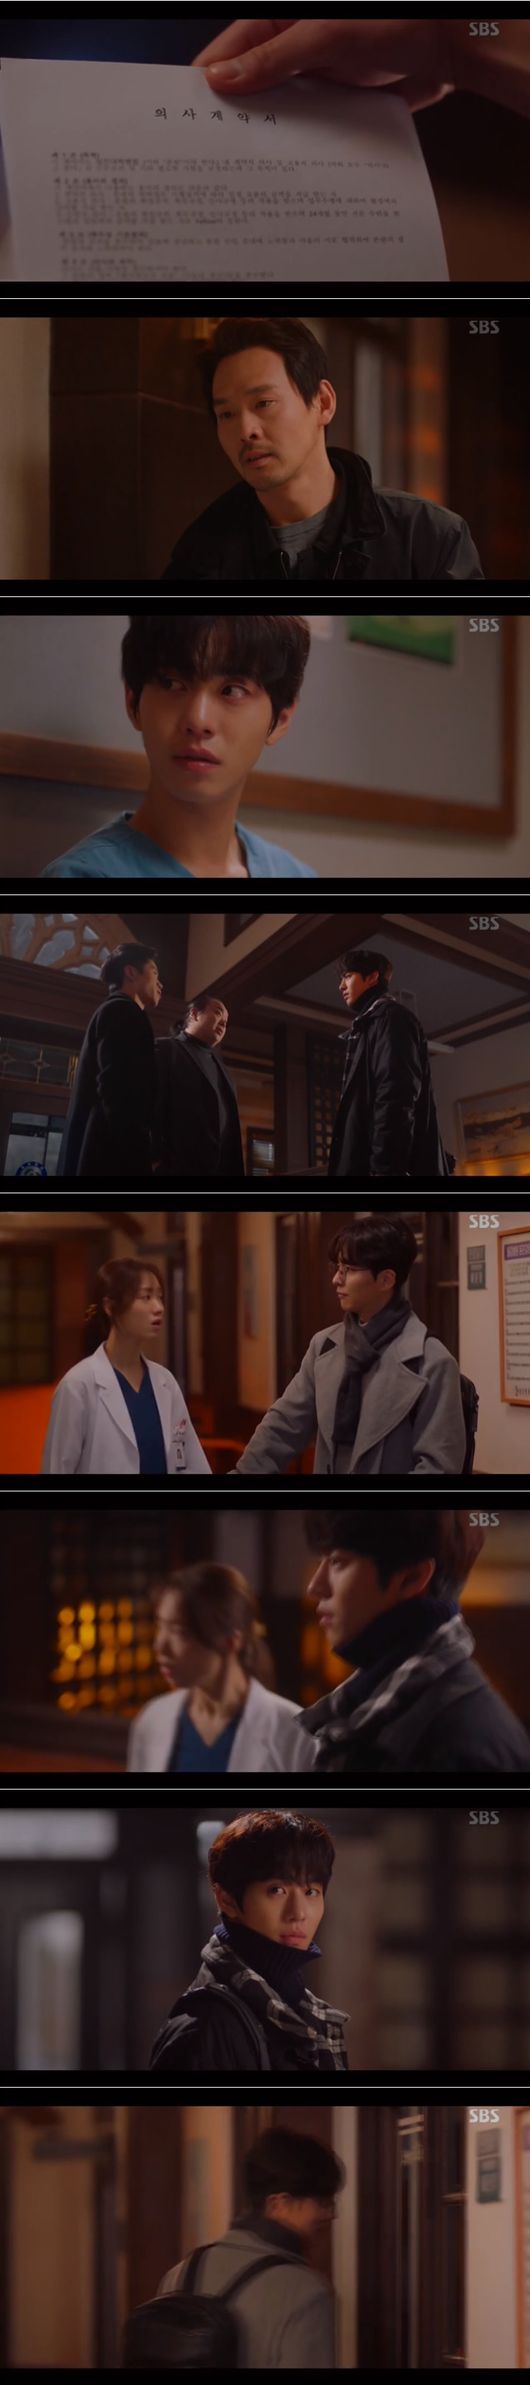 Lee Sung-kyung has been struggling with Han Suk-kyu and Lee Sung-kyung struggling with the presence of Romantic Doctor Kim Sabu 2 Ahn Hyo-seop.In SBS Romantic Doctor Kim Sabu 2, which was broadcast on the afternoon of the 18th, (playplayed by Kang Eun-kyung, directed by Yoo In-sik), Kim Sabu asked Seo Woojin (Ahn Hyo-seop) to become his doctor.Woojin, who says this doesnt change things, was set to scout for Hospital in Seoul.But youre not going to have to leave me with anything in your heart. Two additional questions, this week. So think carefully and ask.There are only two chances, he said, leaving the room. He told Woojin all his symptoms.Cha went through Hospital to meet a scout who came to see Woojin; and there was something to say with Hyunjun.Hyunjun said to Eunjae, who asked if it was because of the Hyunjun, who moved to Seoul, because of the money, and Yang Ho-joon, who was watching it, said, What are you doing now?Did you sleep with her? Its a small rumor. Youre good. Hearing this, Eun-jae hit him in the back of the head and said, Its you who beat me more meanly than the fist.No, now I have Yang Ho-joon. Park called Wujin and asked him to enter the surgery.Woojin signed the contract to the Republic of Korea and told him that he could be at Hospital until today, and left a request to adjust it to this week.Kim remembered that the deadline given by Kim Sabu was this week. I have to see the progress of the patient who operated today. He said that the Republic of Korea would adjust the date.Kim Sa-bu went after Hyunjun.When Kim Sabu said, If I sell my family and my juniors are all worthy of money, I am conscience, nabal, and selling everything, he said, Hyunjun tried to do it.Kim said that he should not confuse conscience and greed, and turned his back with the words poor young.Eunjae told Woojin not to miss me, and soon he grabbed him to ask the stone wall Hospital for bones together.Woojin asked, What if you do this and I really cross the line? And Woojin left the place with a frozen silver.Jung In-soo was in the bathroom, thinking about a work contract, a paper by Won-young Hospital, and when he was worried and missed the paper, Park Eun-tak picked up the paper.The two of them get a call from the emergency room and then they go out.You really cant, I was going to release the boycott, but you have to rot more in this rural hospital. Kim Sabus sting was dirty.Youll live right because Ill leave you behind. Show me, you little bastard. He left the hospital.The silver, who knew nothing, was peeking into the room where Woojin was packing; the silver, which he kept his cell phone hidden from him.I am sorry for the inconvenience and the mischief, and I paid the principal and interest well.Ushijima the Loan Shark left him a greeting of Goodbye and left the hospital.He was smiling at his appearance as if he knew something, but Eun-jae thought it was all the power of his gangsters.Outside the door, the gangsters were lined up, and the gangsters began to scare the Ushijima the Loan Shark, despite the words I do not apologize for you.Eunjae, who was looking at it from afar, looked at the gangsters and greeted them at once.The Republic of Korea received a call from Chairman Do Yun-wan. Asked about the table death, he asked if Sejin Group chairman knew.He said he was important to us, but he said he would take responsibility for making things a matter of business.He threw another trick at him, saying that what Im saying now could be the last way to get out alive.SBS Romantic Doctor Kim Sabu 2 captures broadcast screen